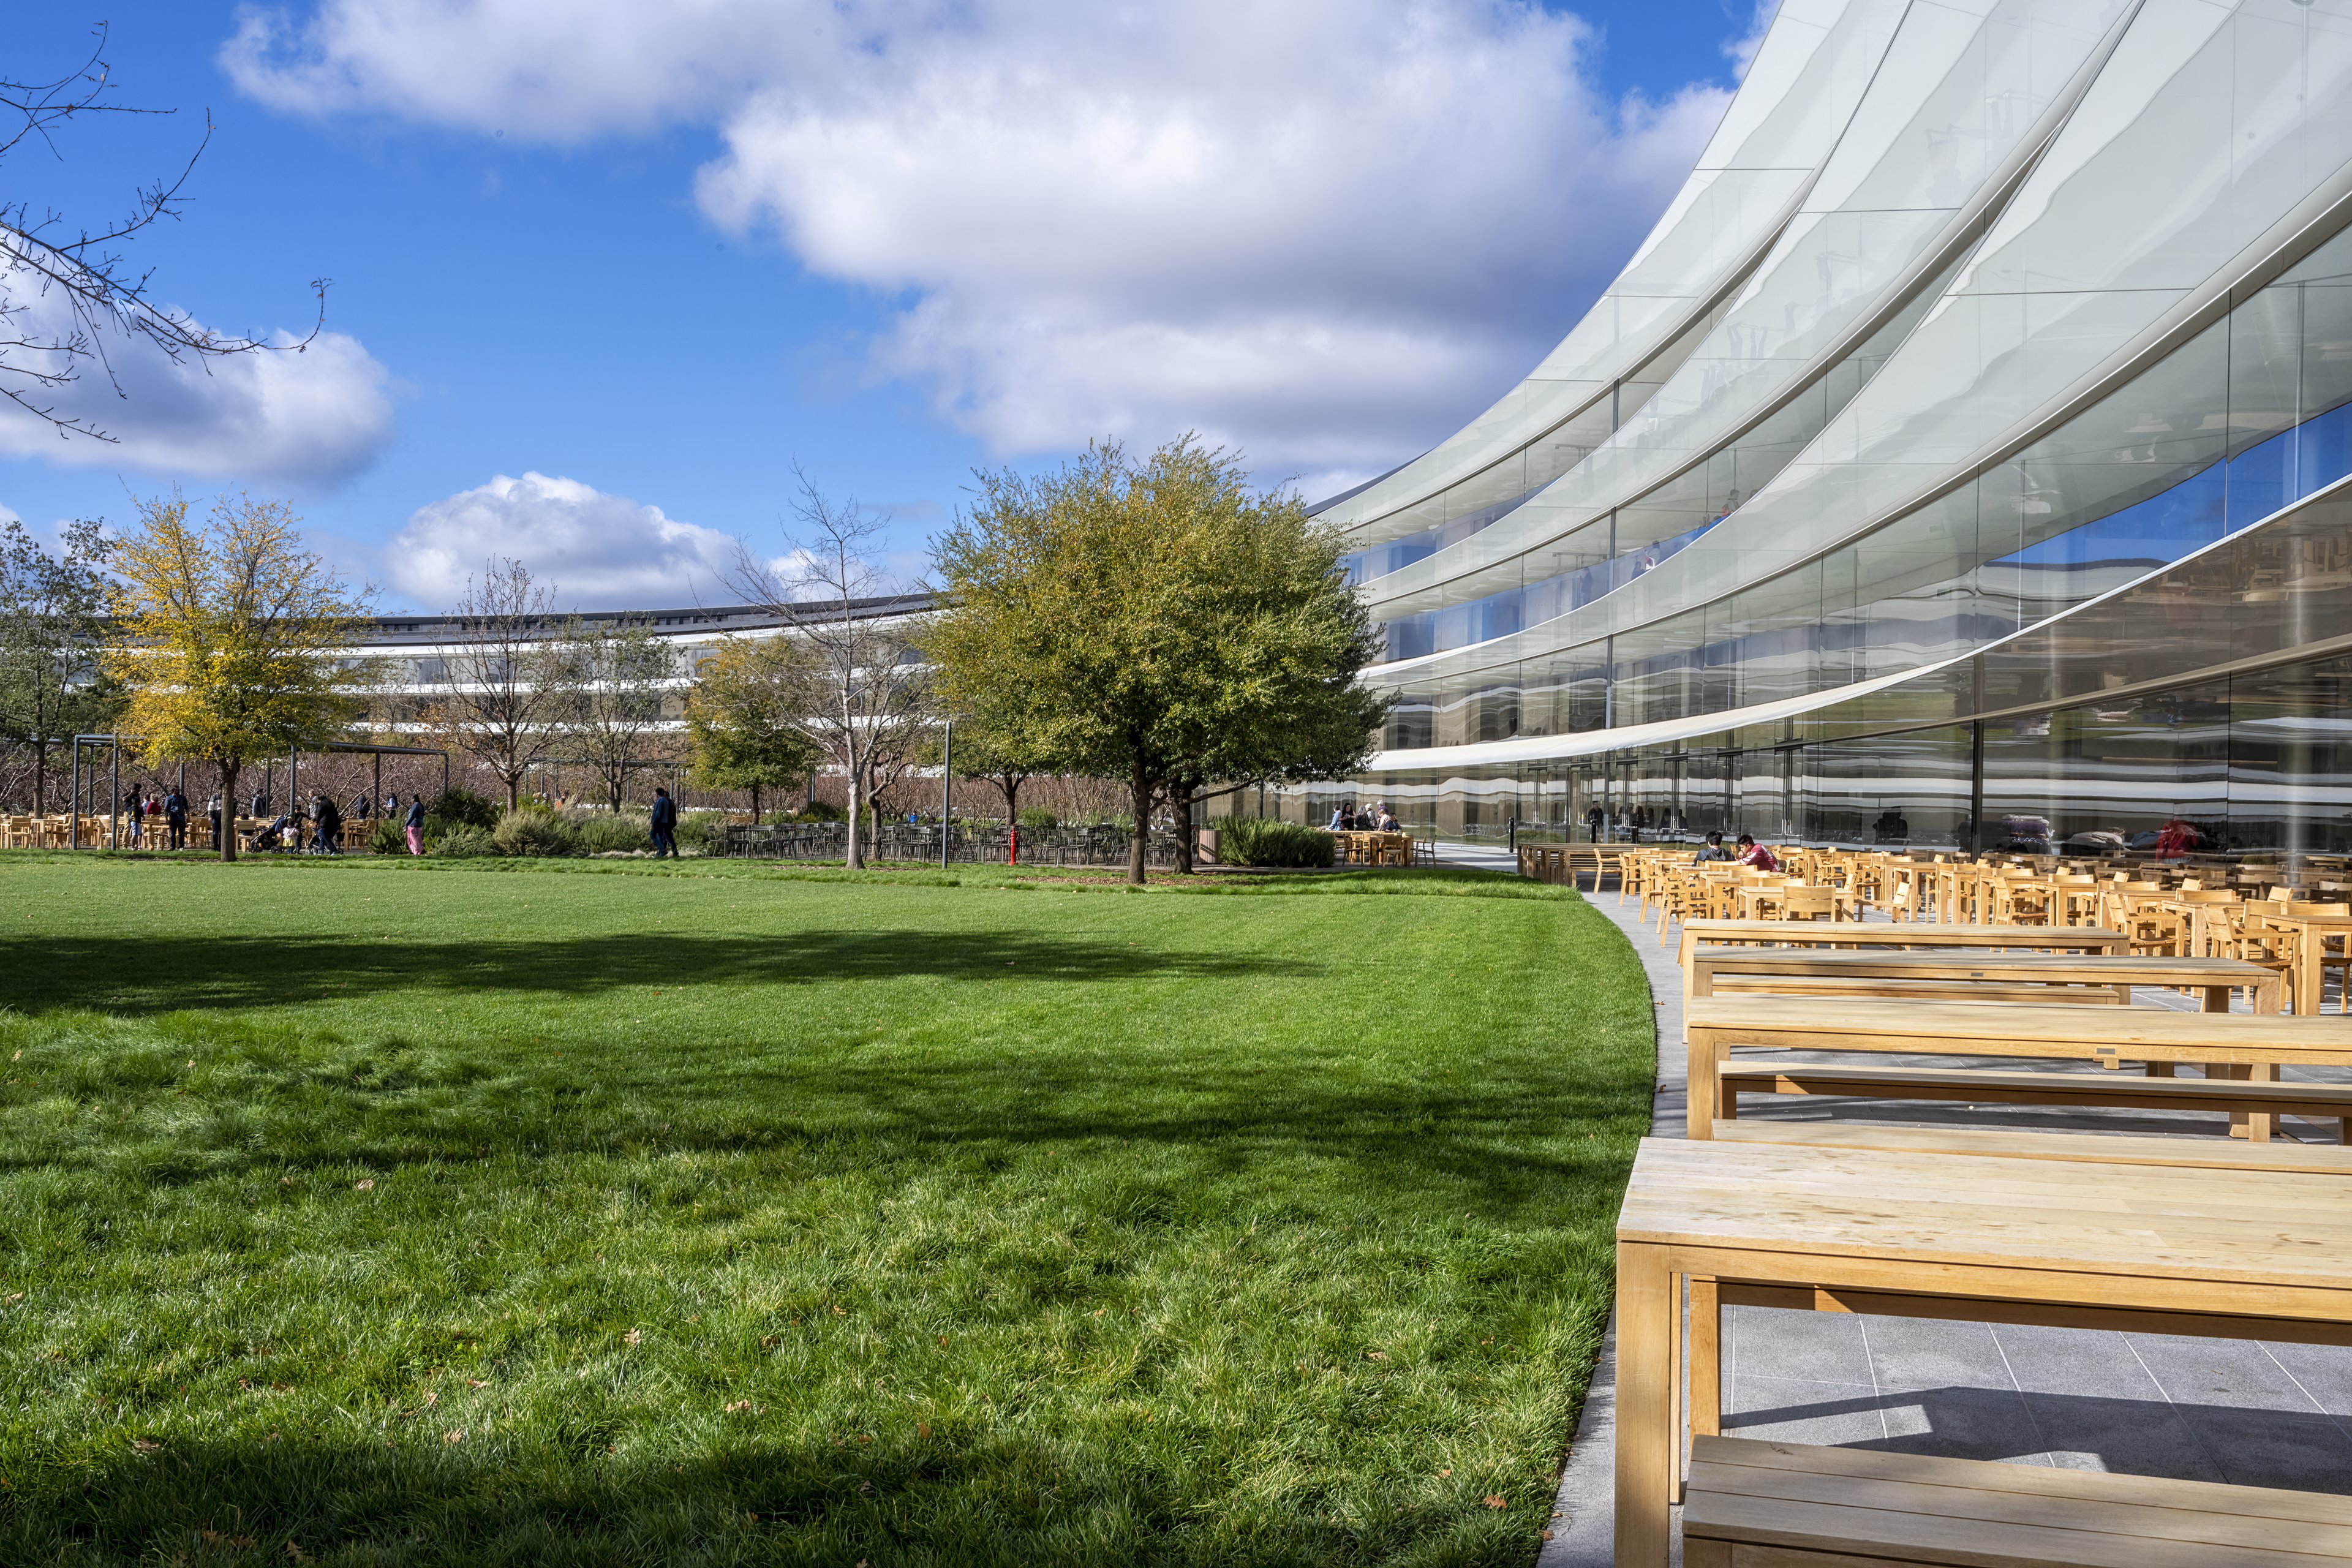 Cupertino CA USA December 14, 2019: Apple headquarters offices building exterior and inner court with outdoor eating area, on a bright cold December day.